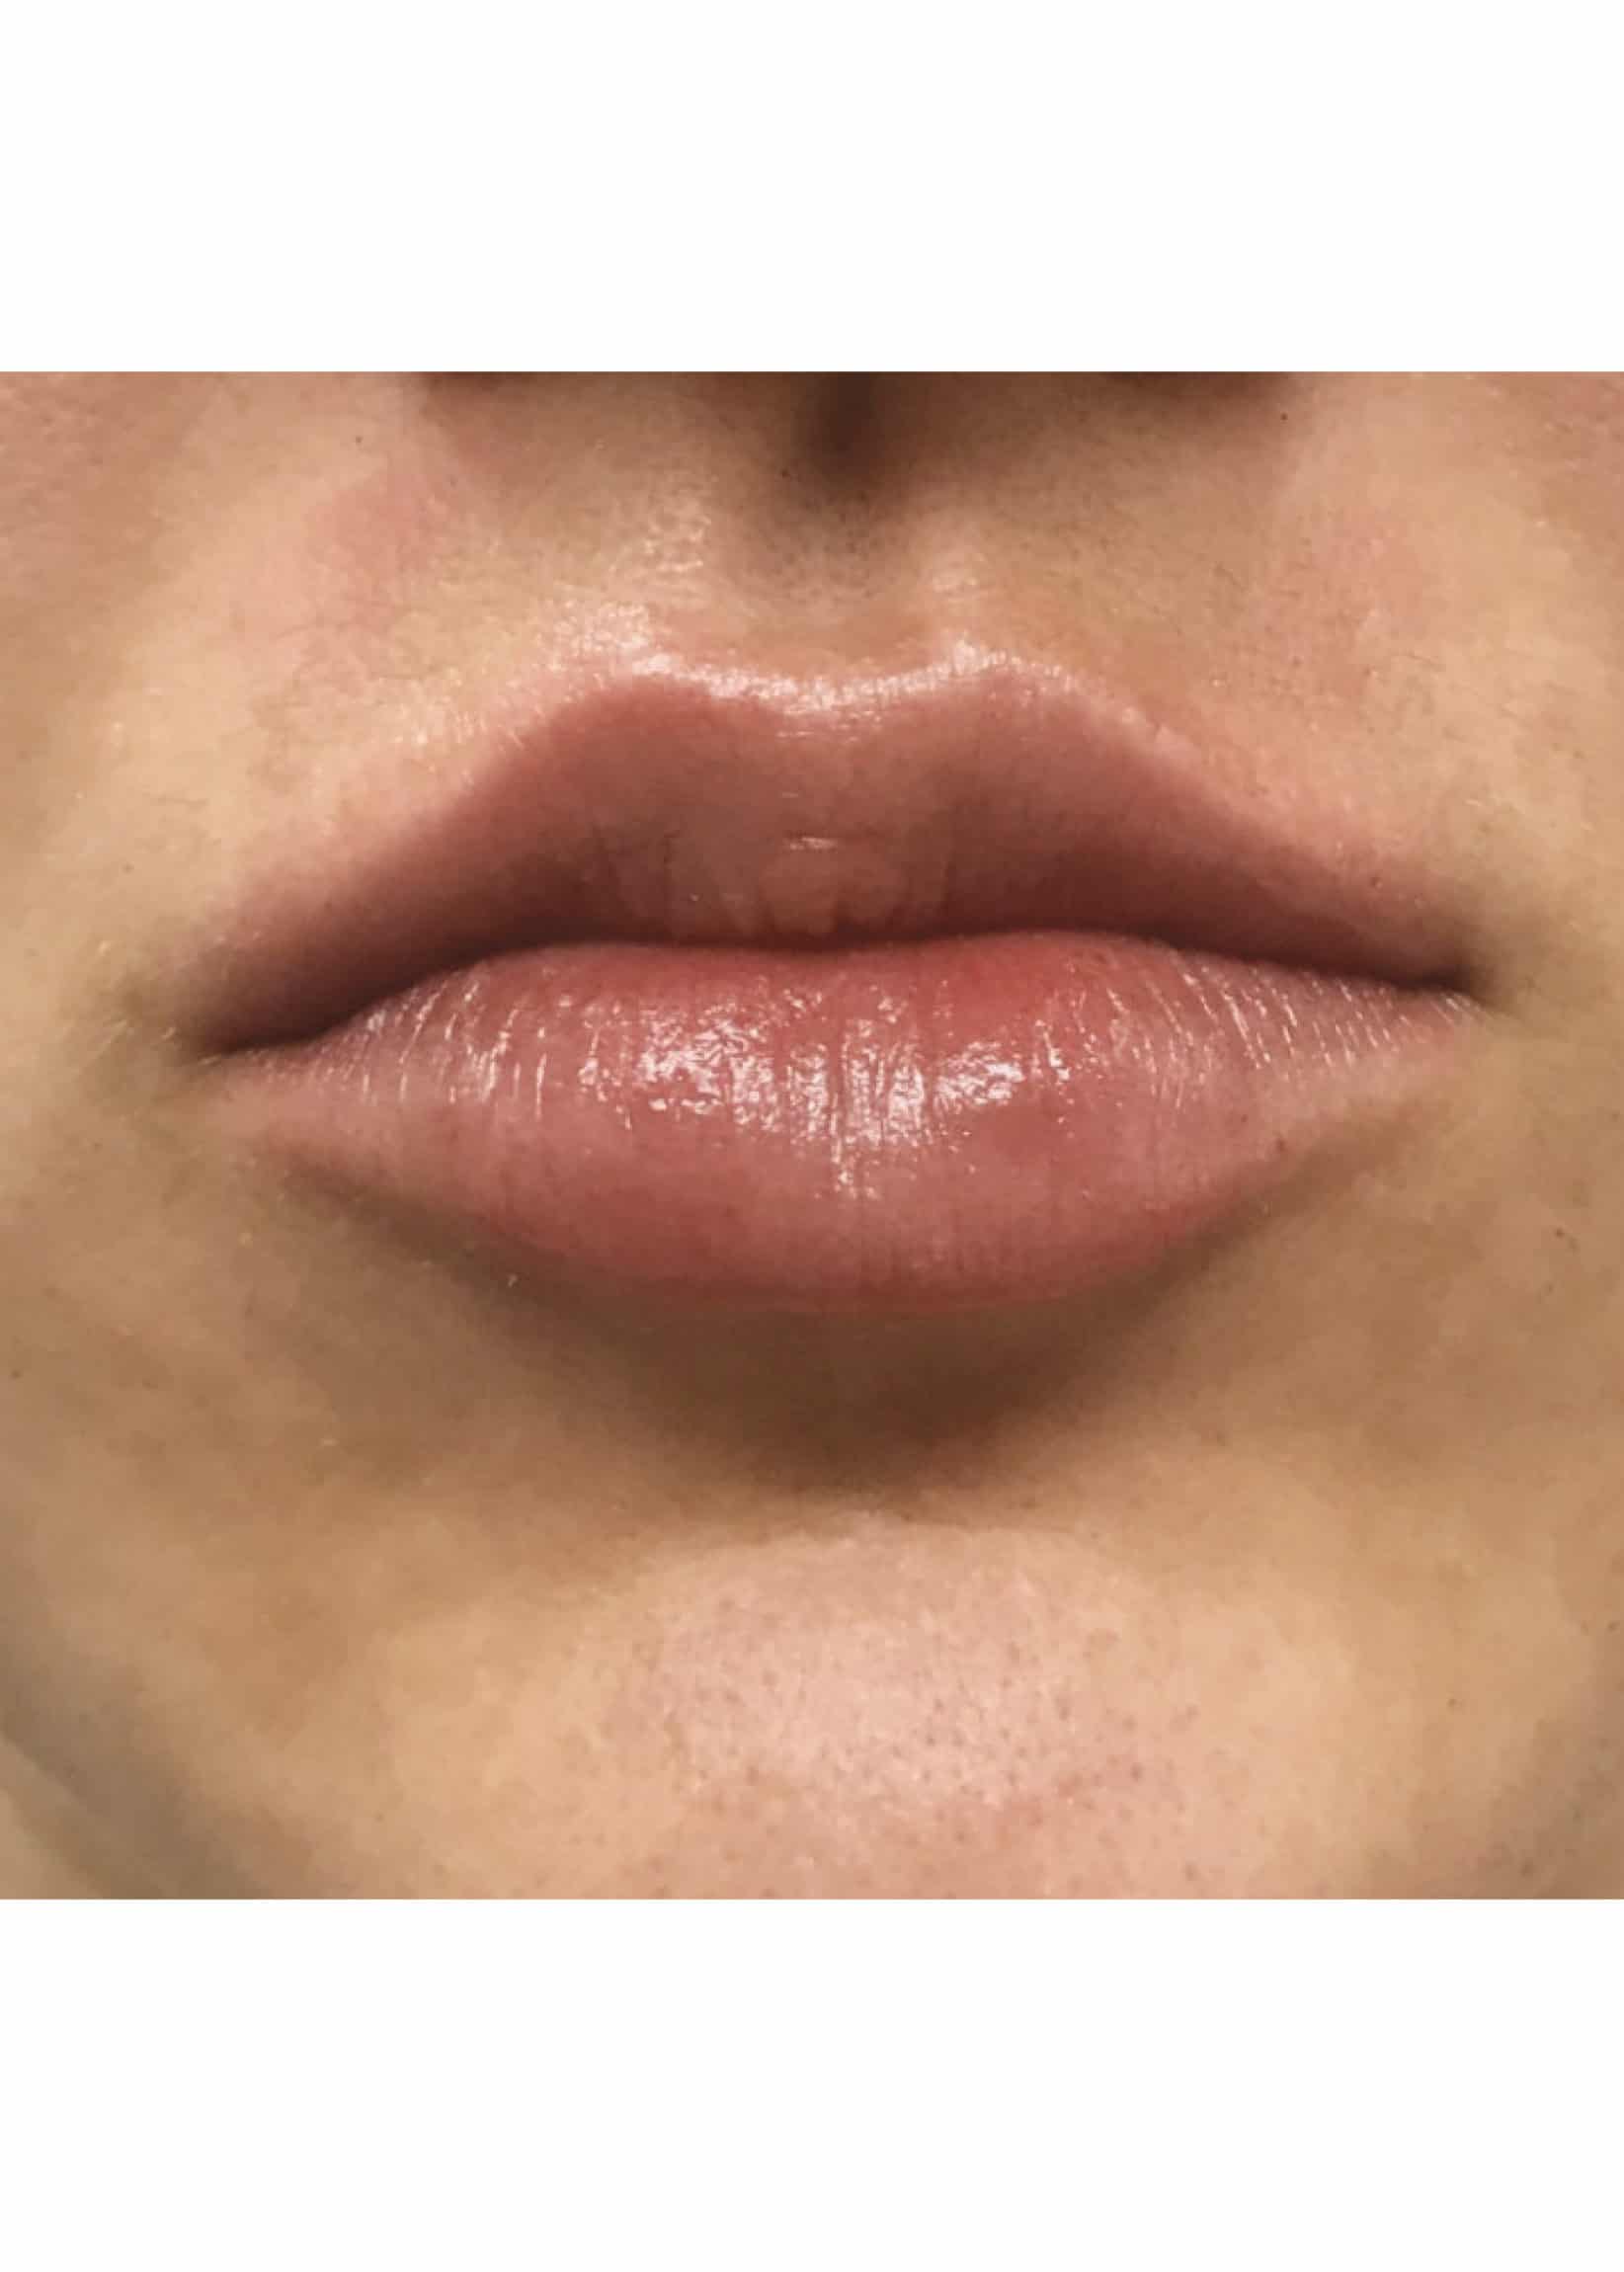 TheSkinCenter ProviderPages JonnaBlum LipFiller After 1 scaled 1